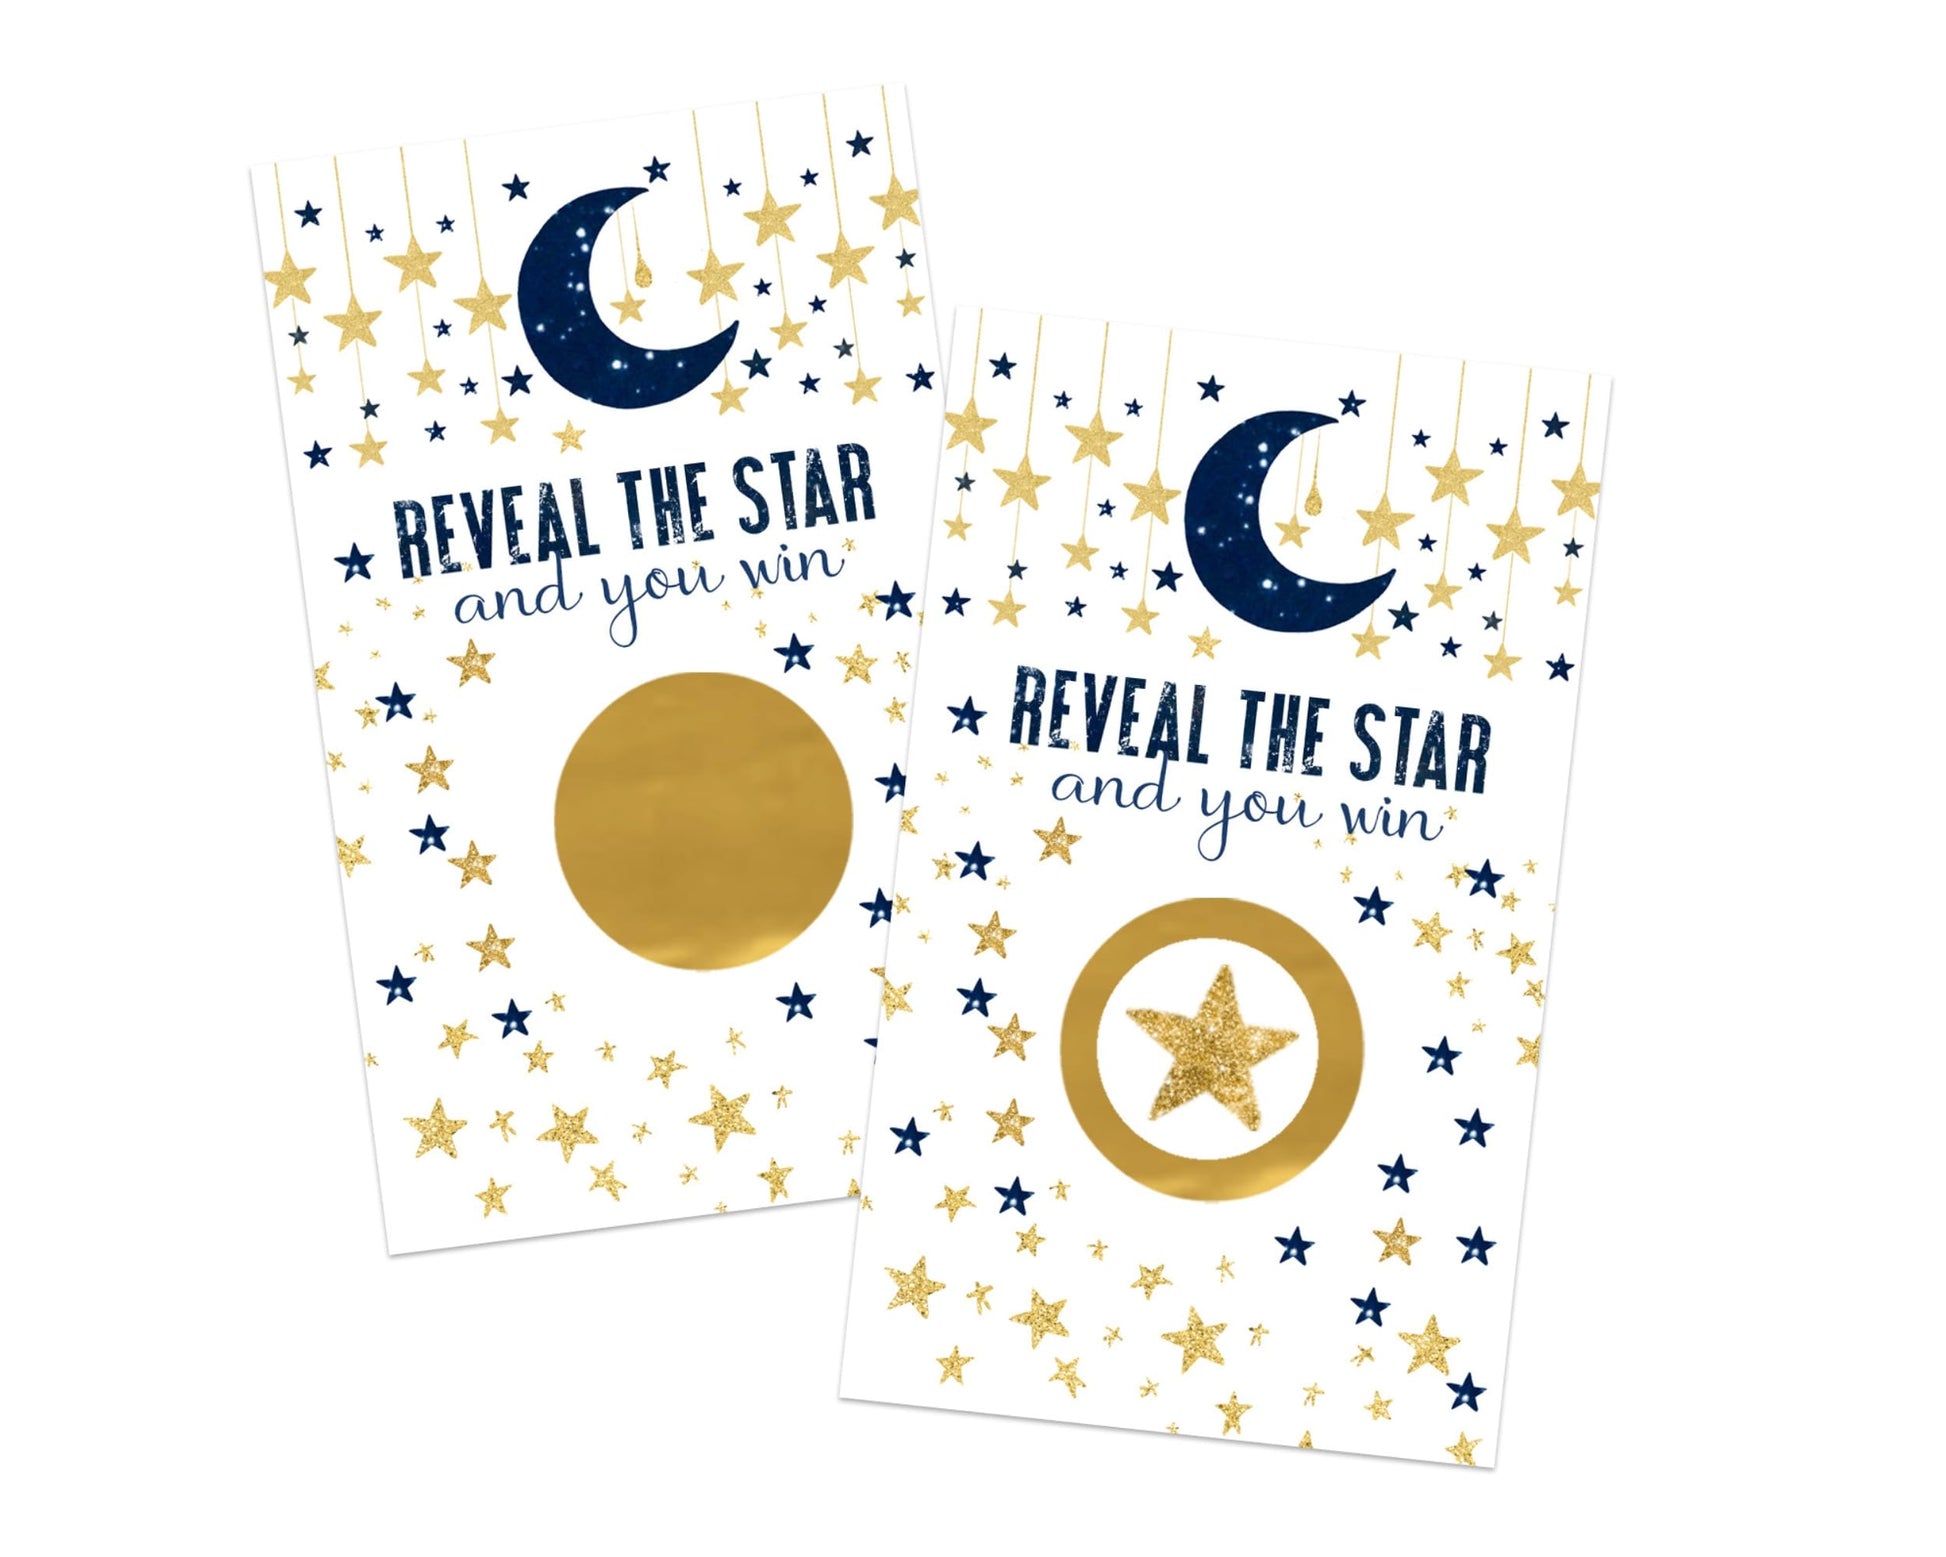 Game Cards (30 Pack) Boys Baby Shower Activity - Celestial Raffle TicketsPaper Clever Party